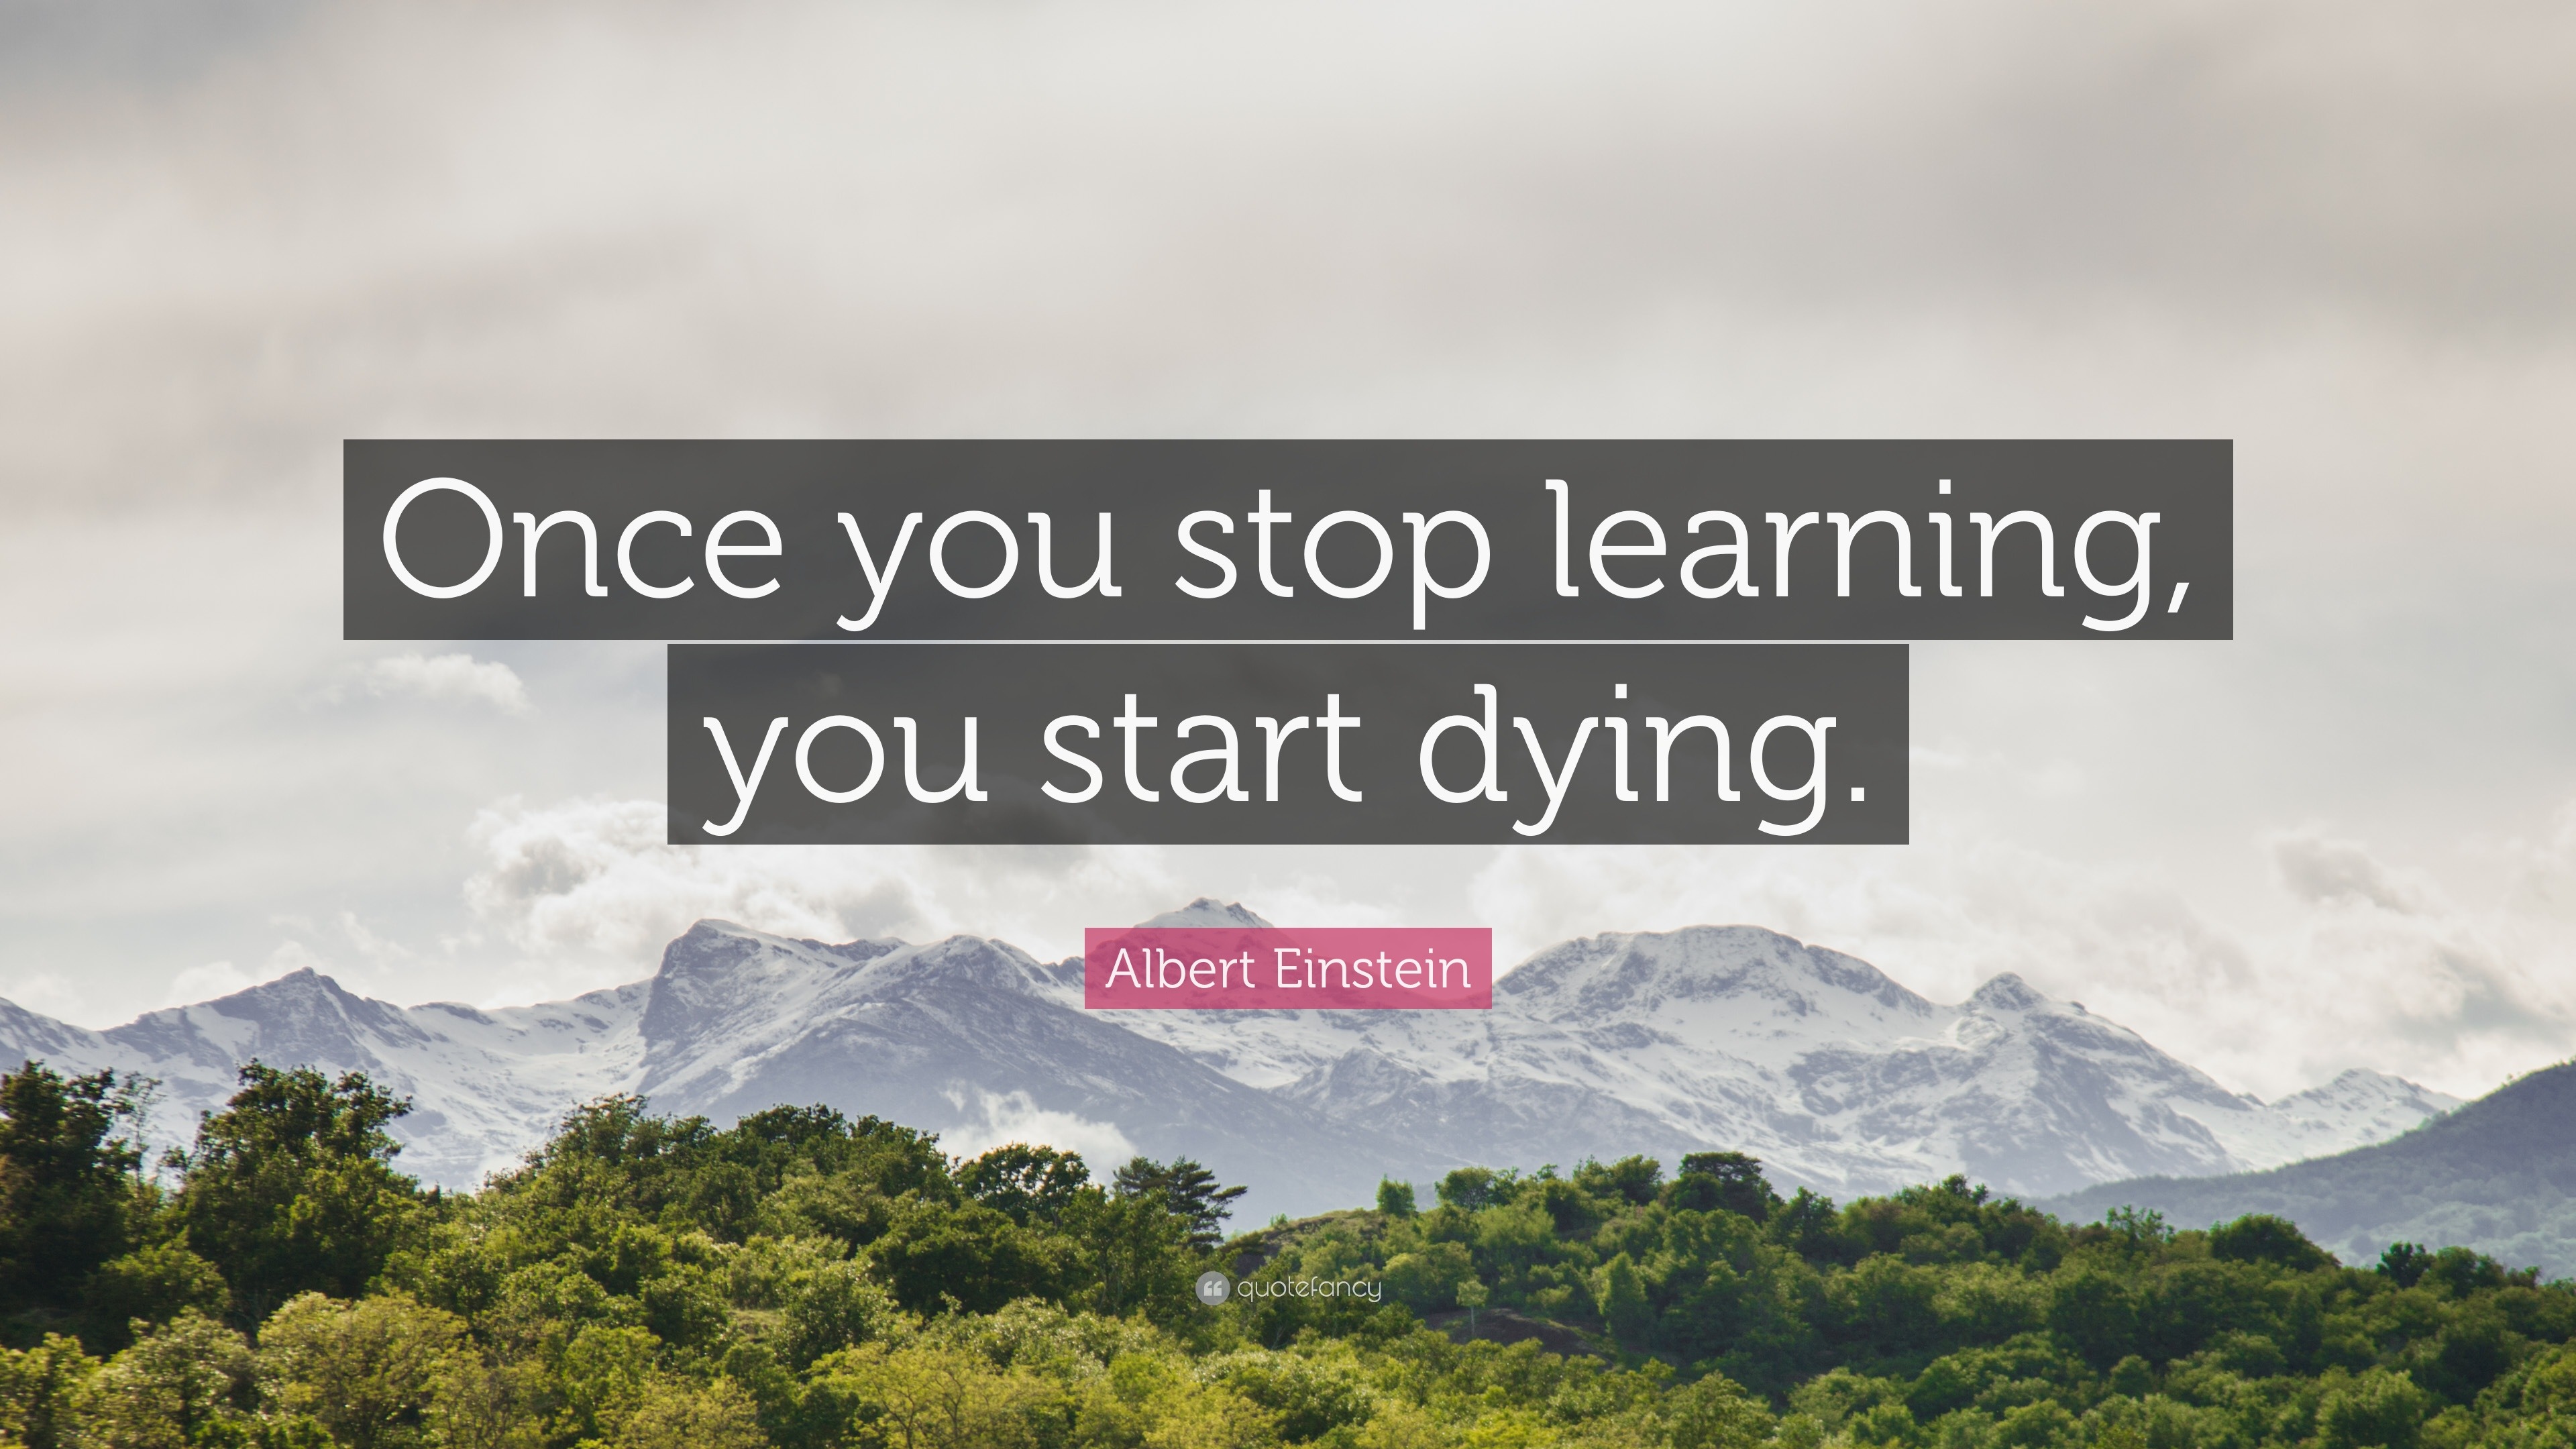 442014-Albert-Einstein-Quote-Once-you-stop-learning-you-start-dying.jpg